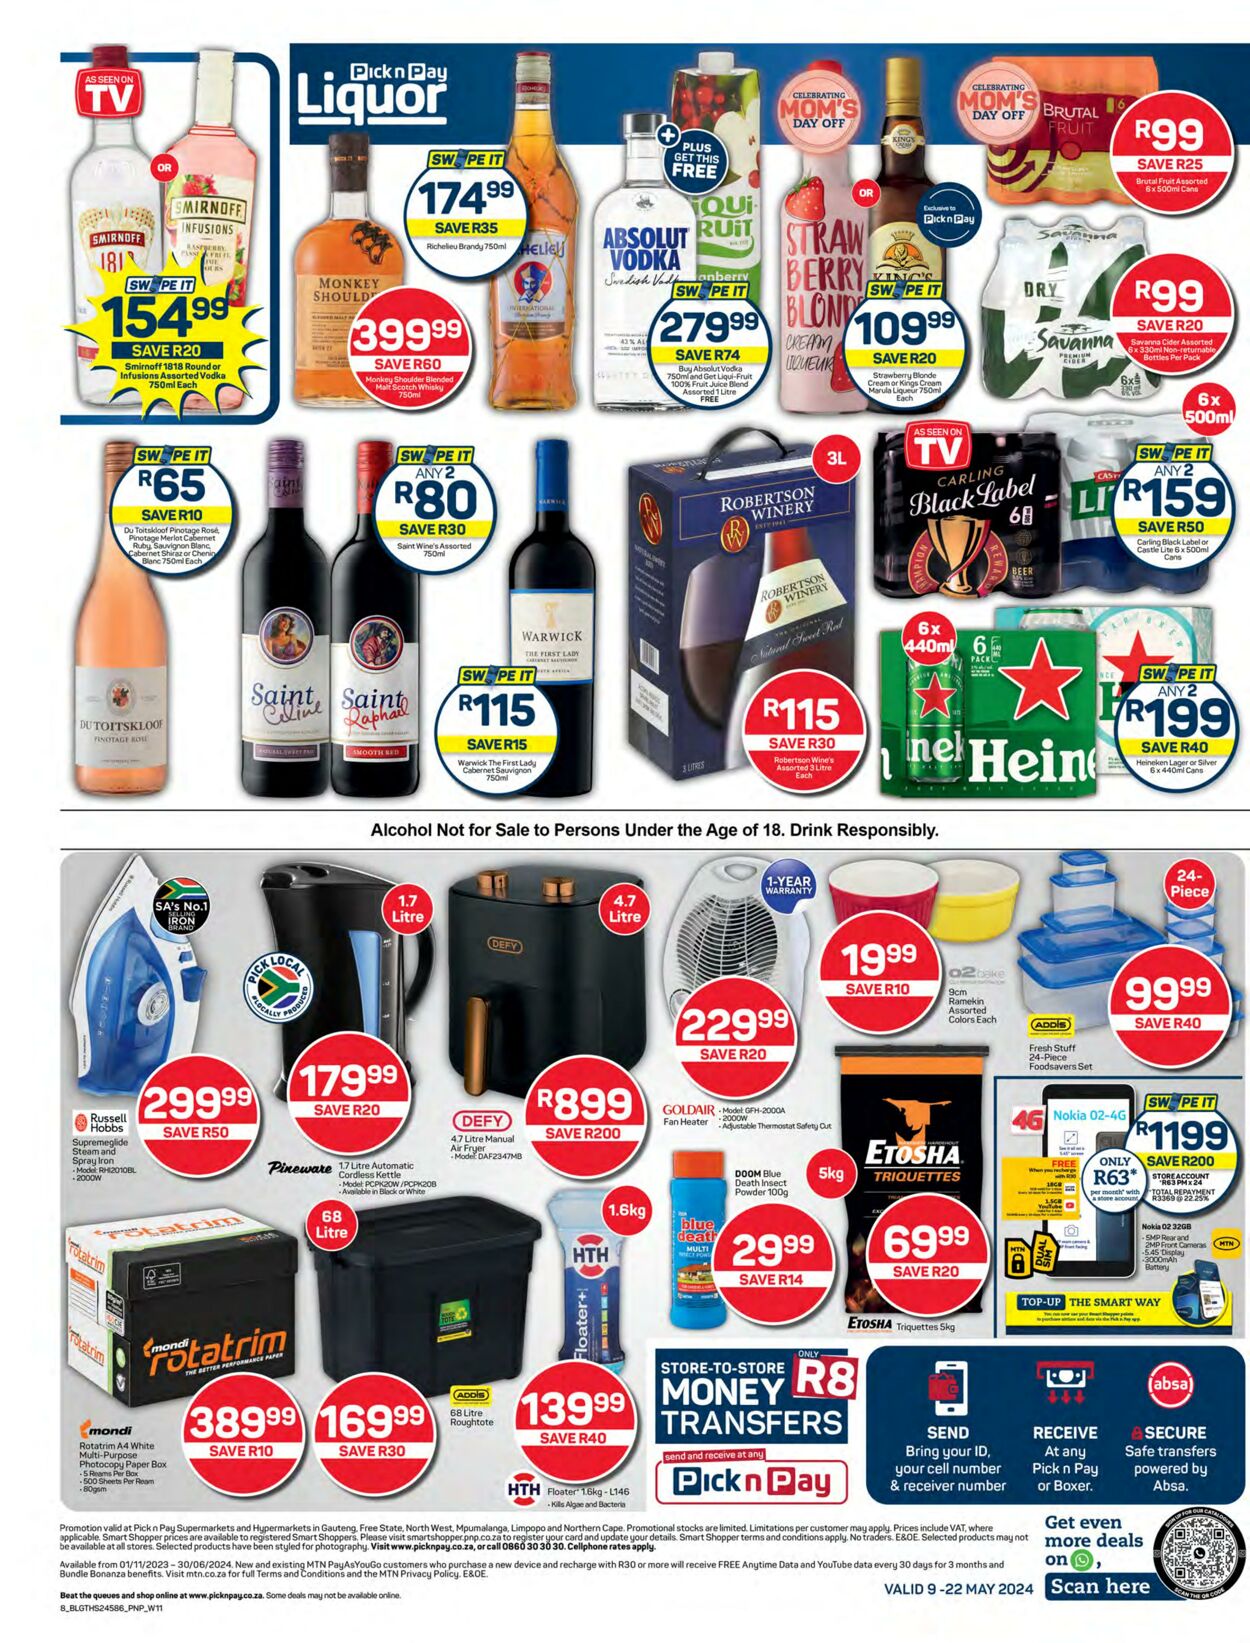 Special Pick n Pay 10.05.2024 - 22.05.2024